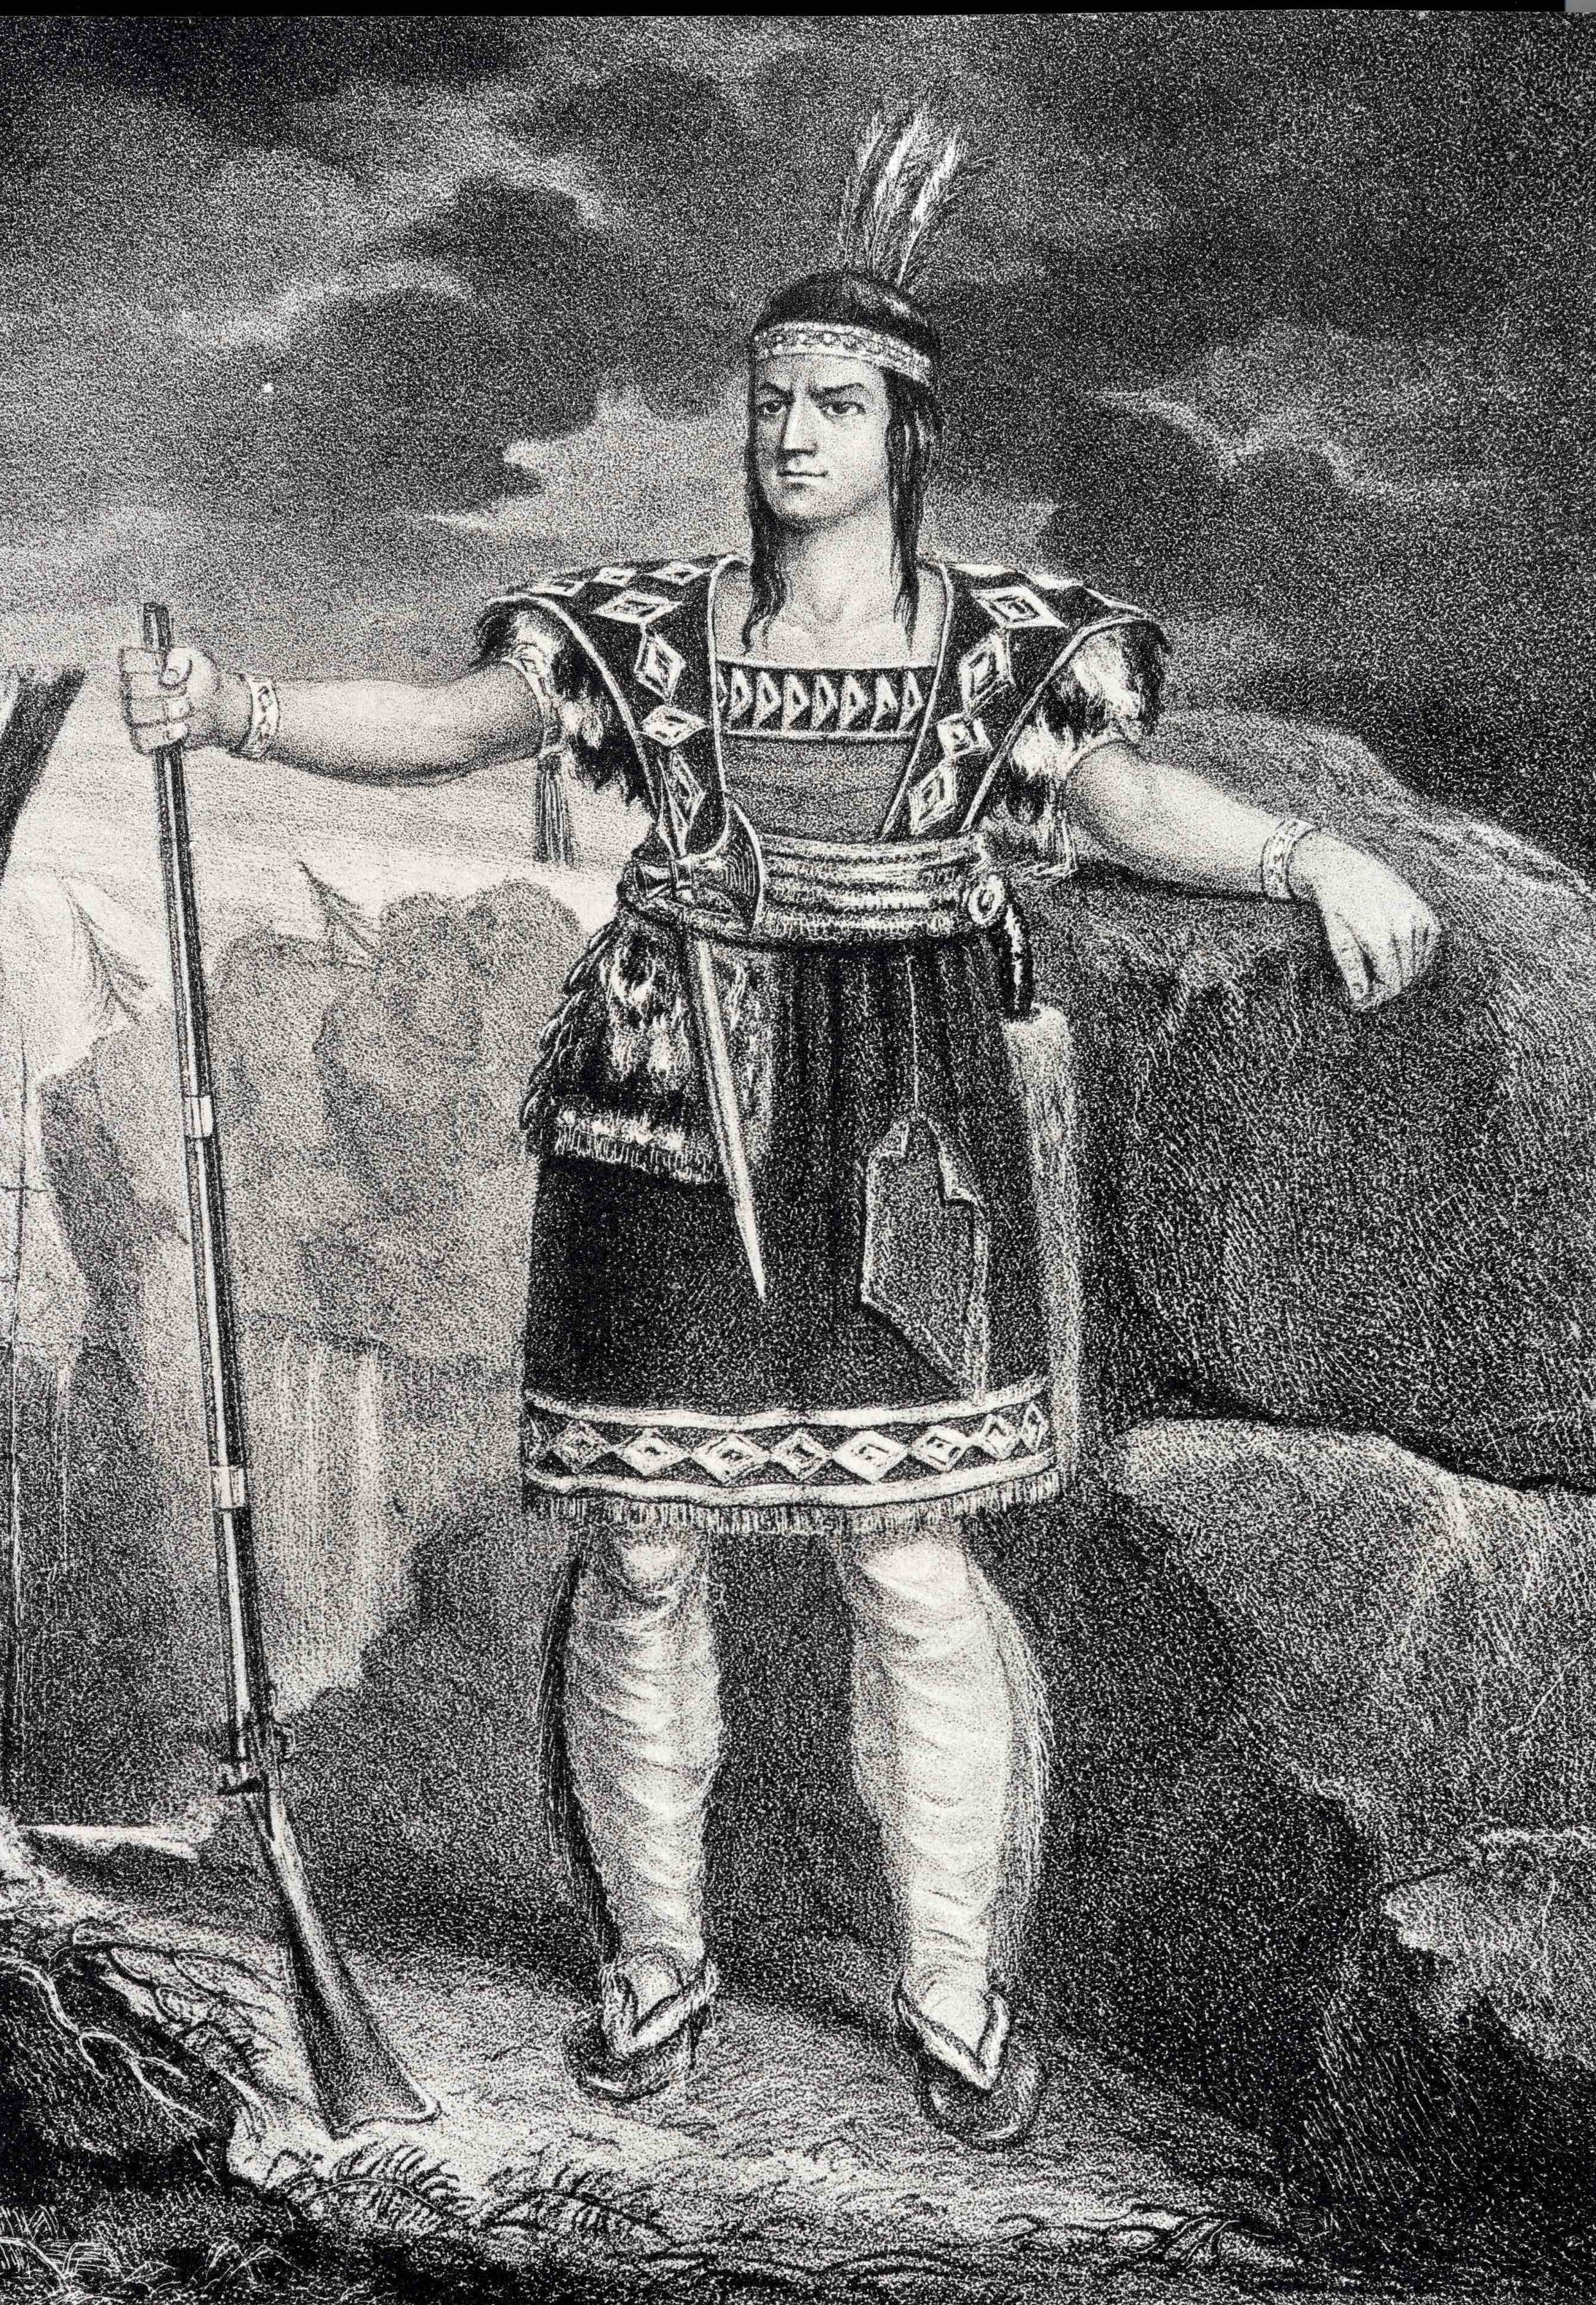  Edwin Forrest as Metamora in a lithograph illustration by D. C. Johnson. Repro- duced courtesy of the University of Illinois at Urbana-Champaign. 